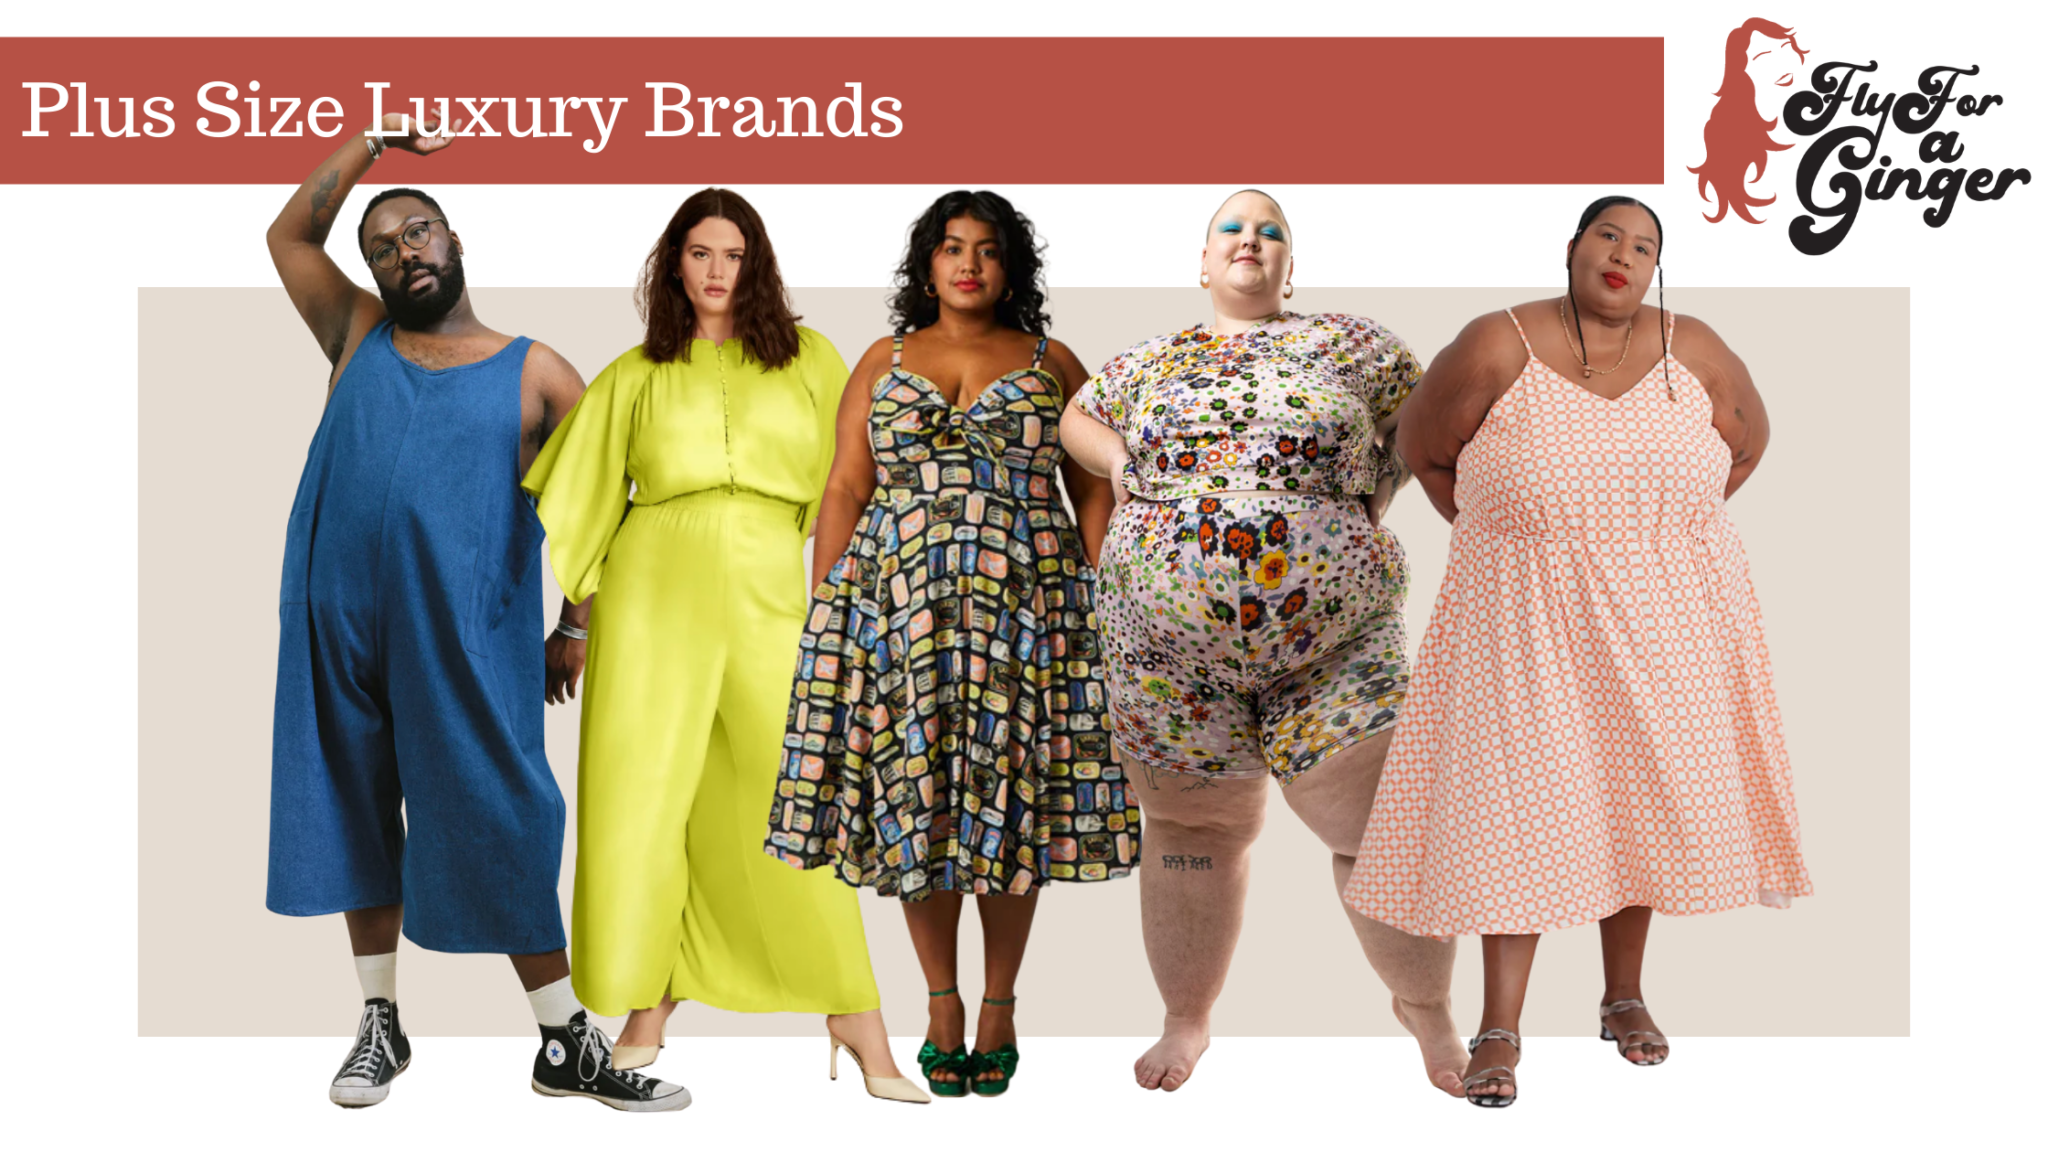 Plus Size Luxury Brands // Where to Find Plus Size Luxury Fashion